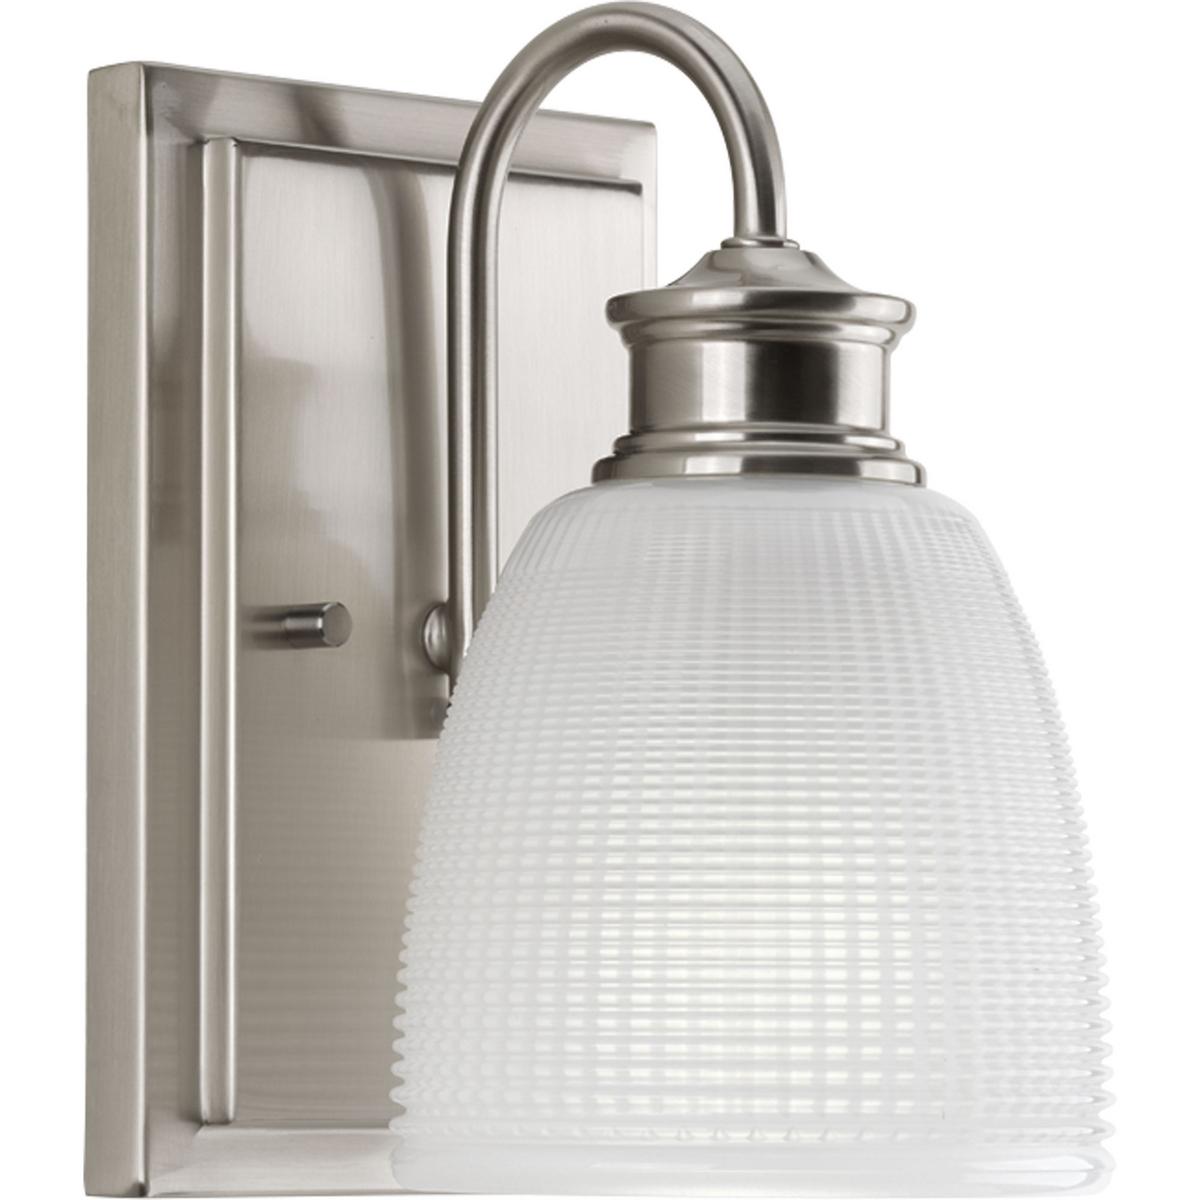 Hubbell P2115-09 One-light bath from the Lucky Collection, with a distinctive design that evokes a vintage flair with finely crafted details. Light is beautifully illuminated through double prismatic frosted glass shades. Brushed Nickel finish.  ; Ideal for a bathroom, ha